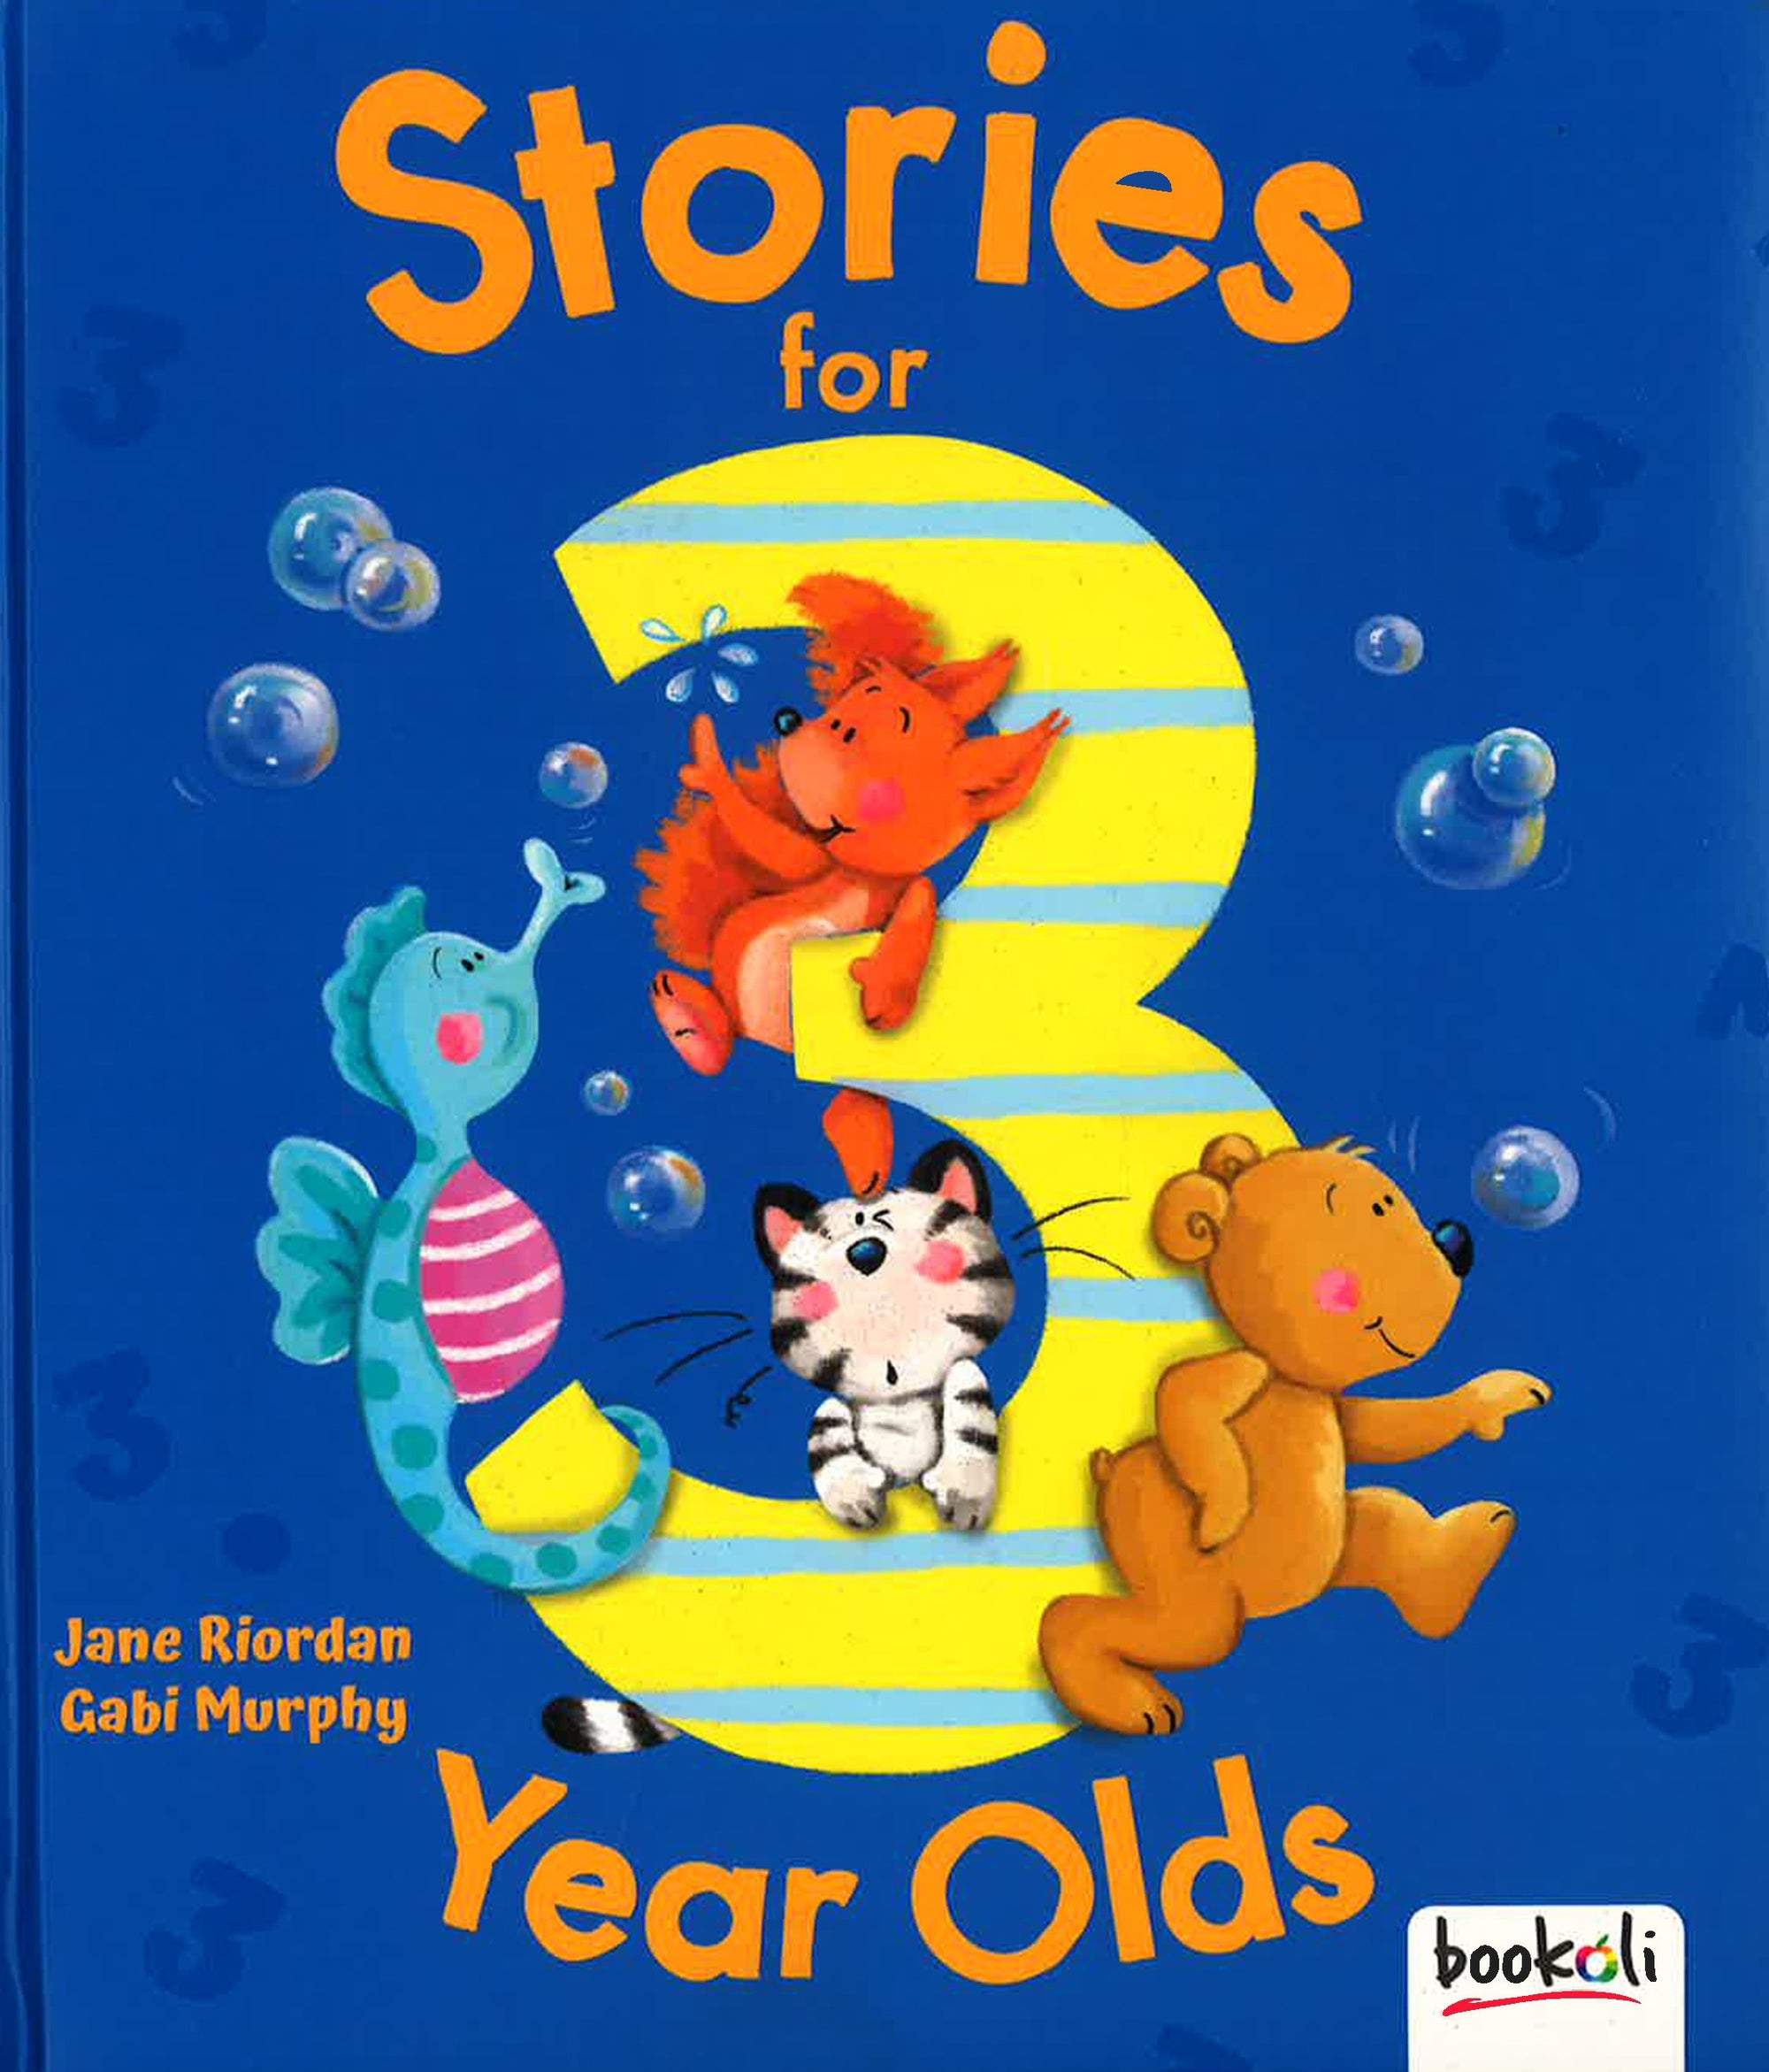 fiction books 3 year old